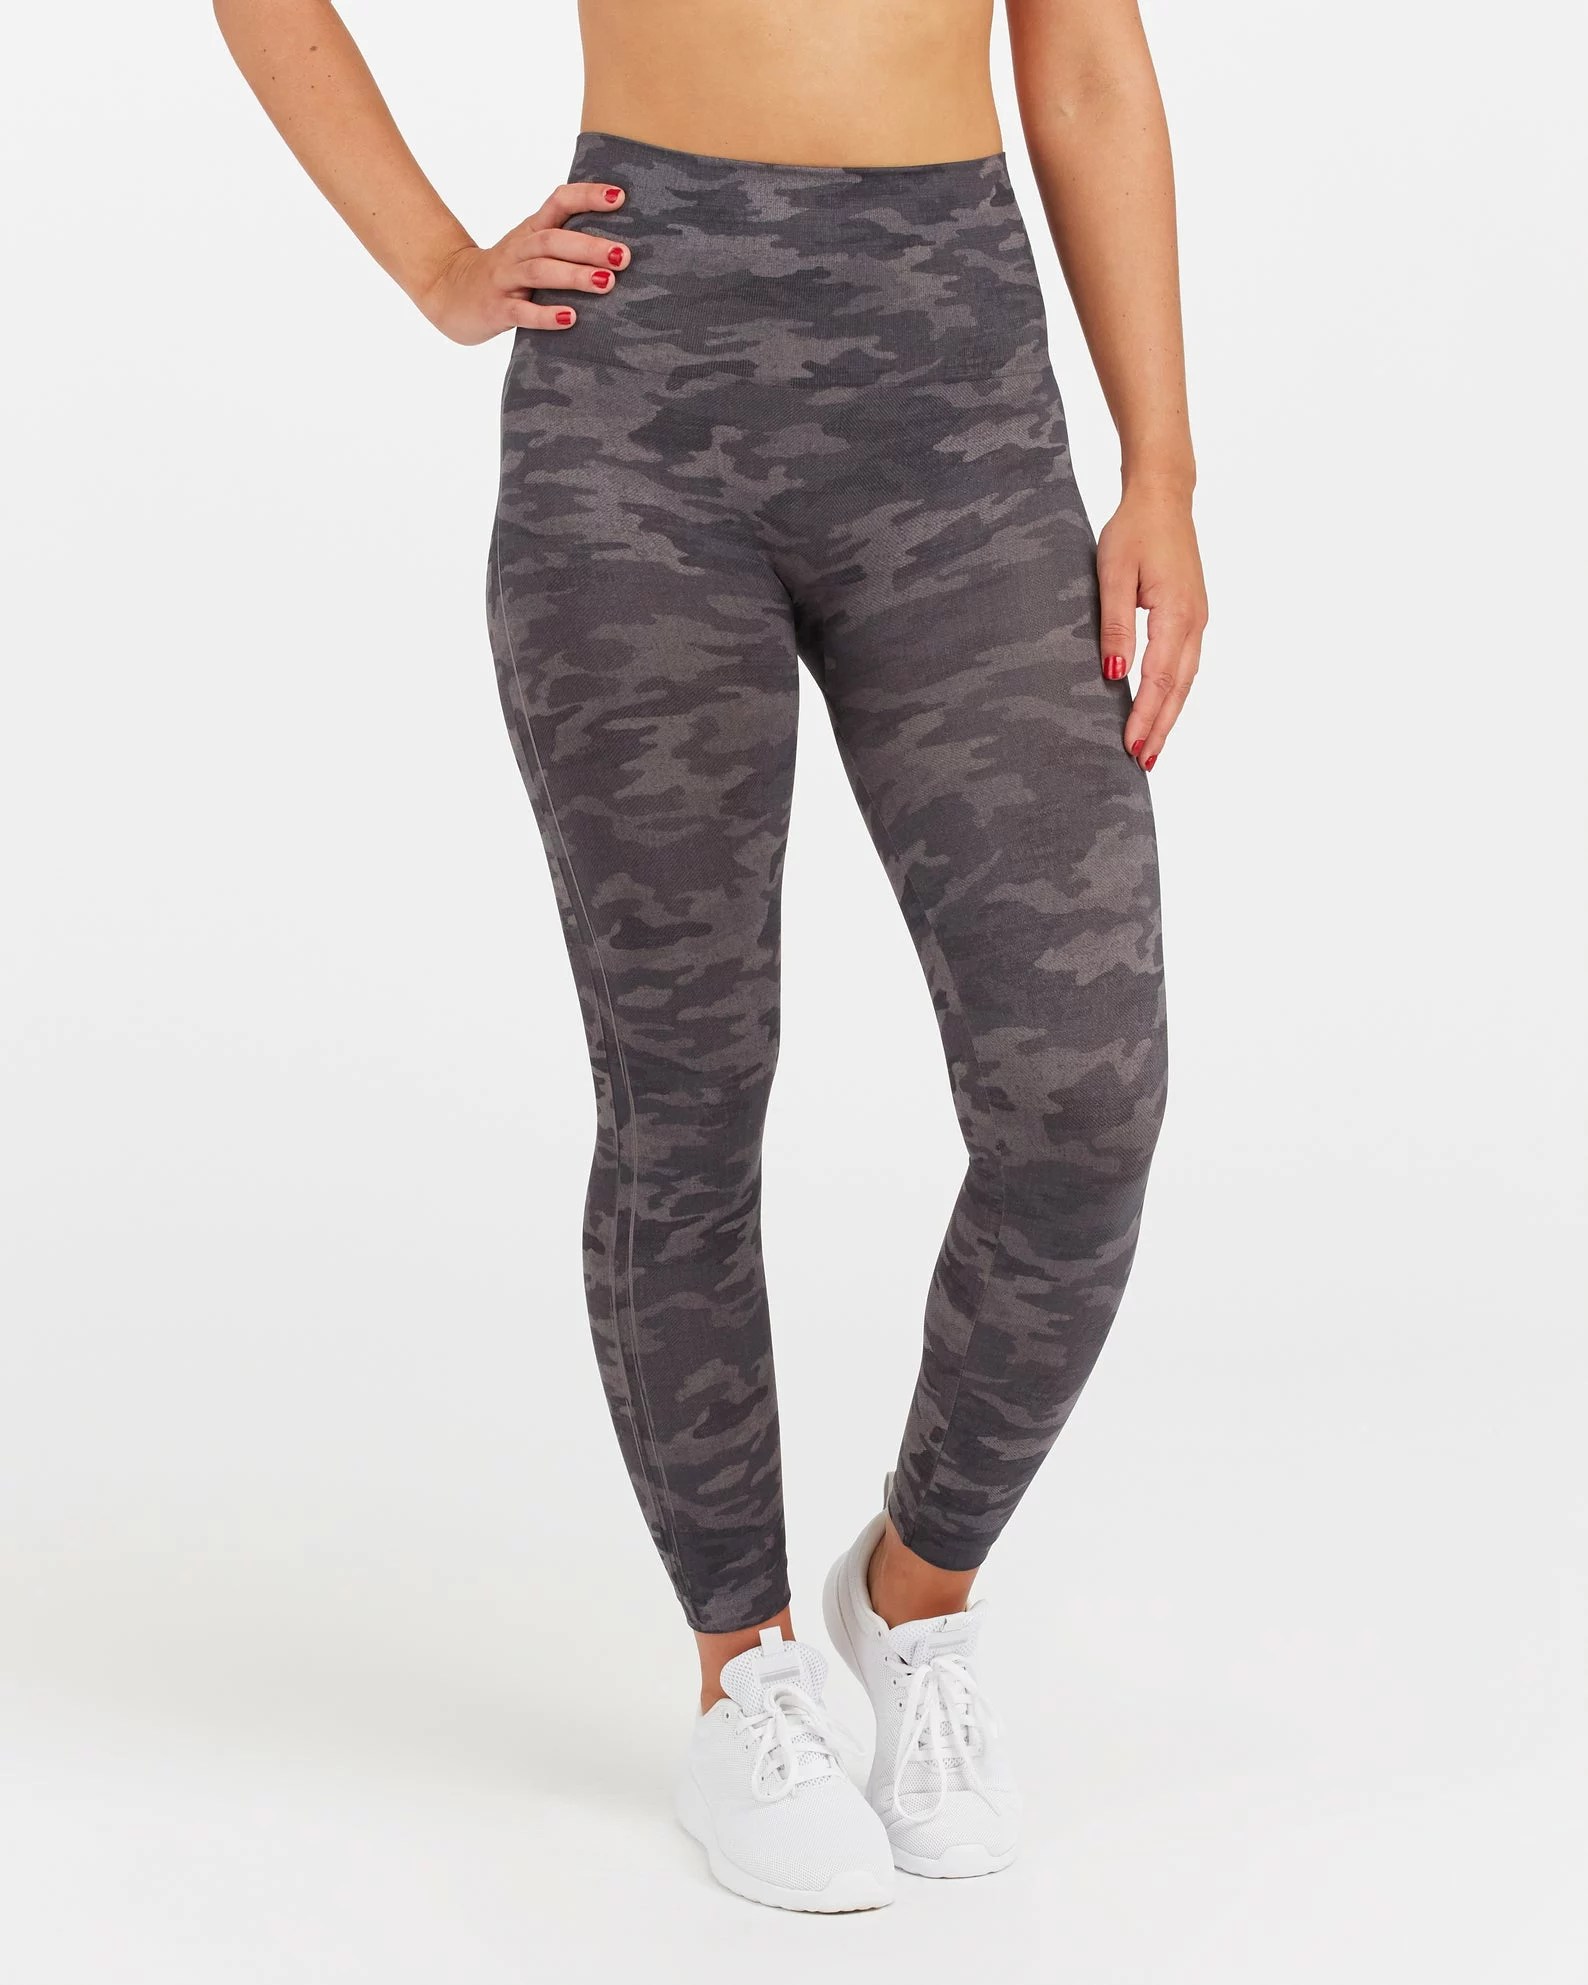 NEW $68 Spanx Look at Me Now' Seamless Leggings Black [ Small